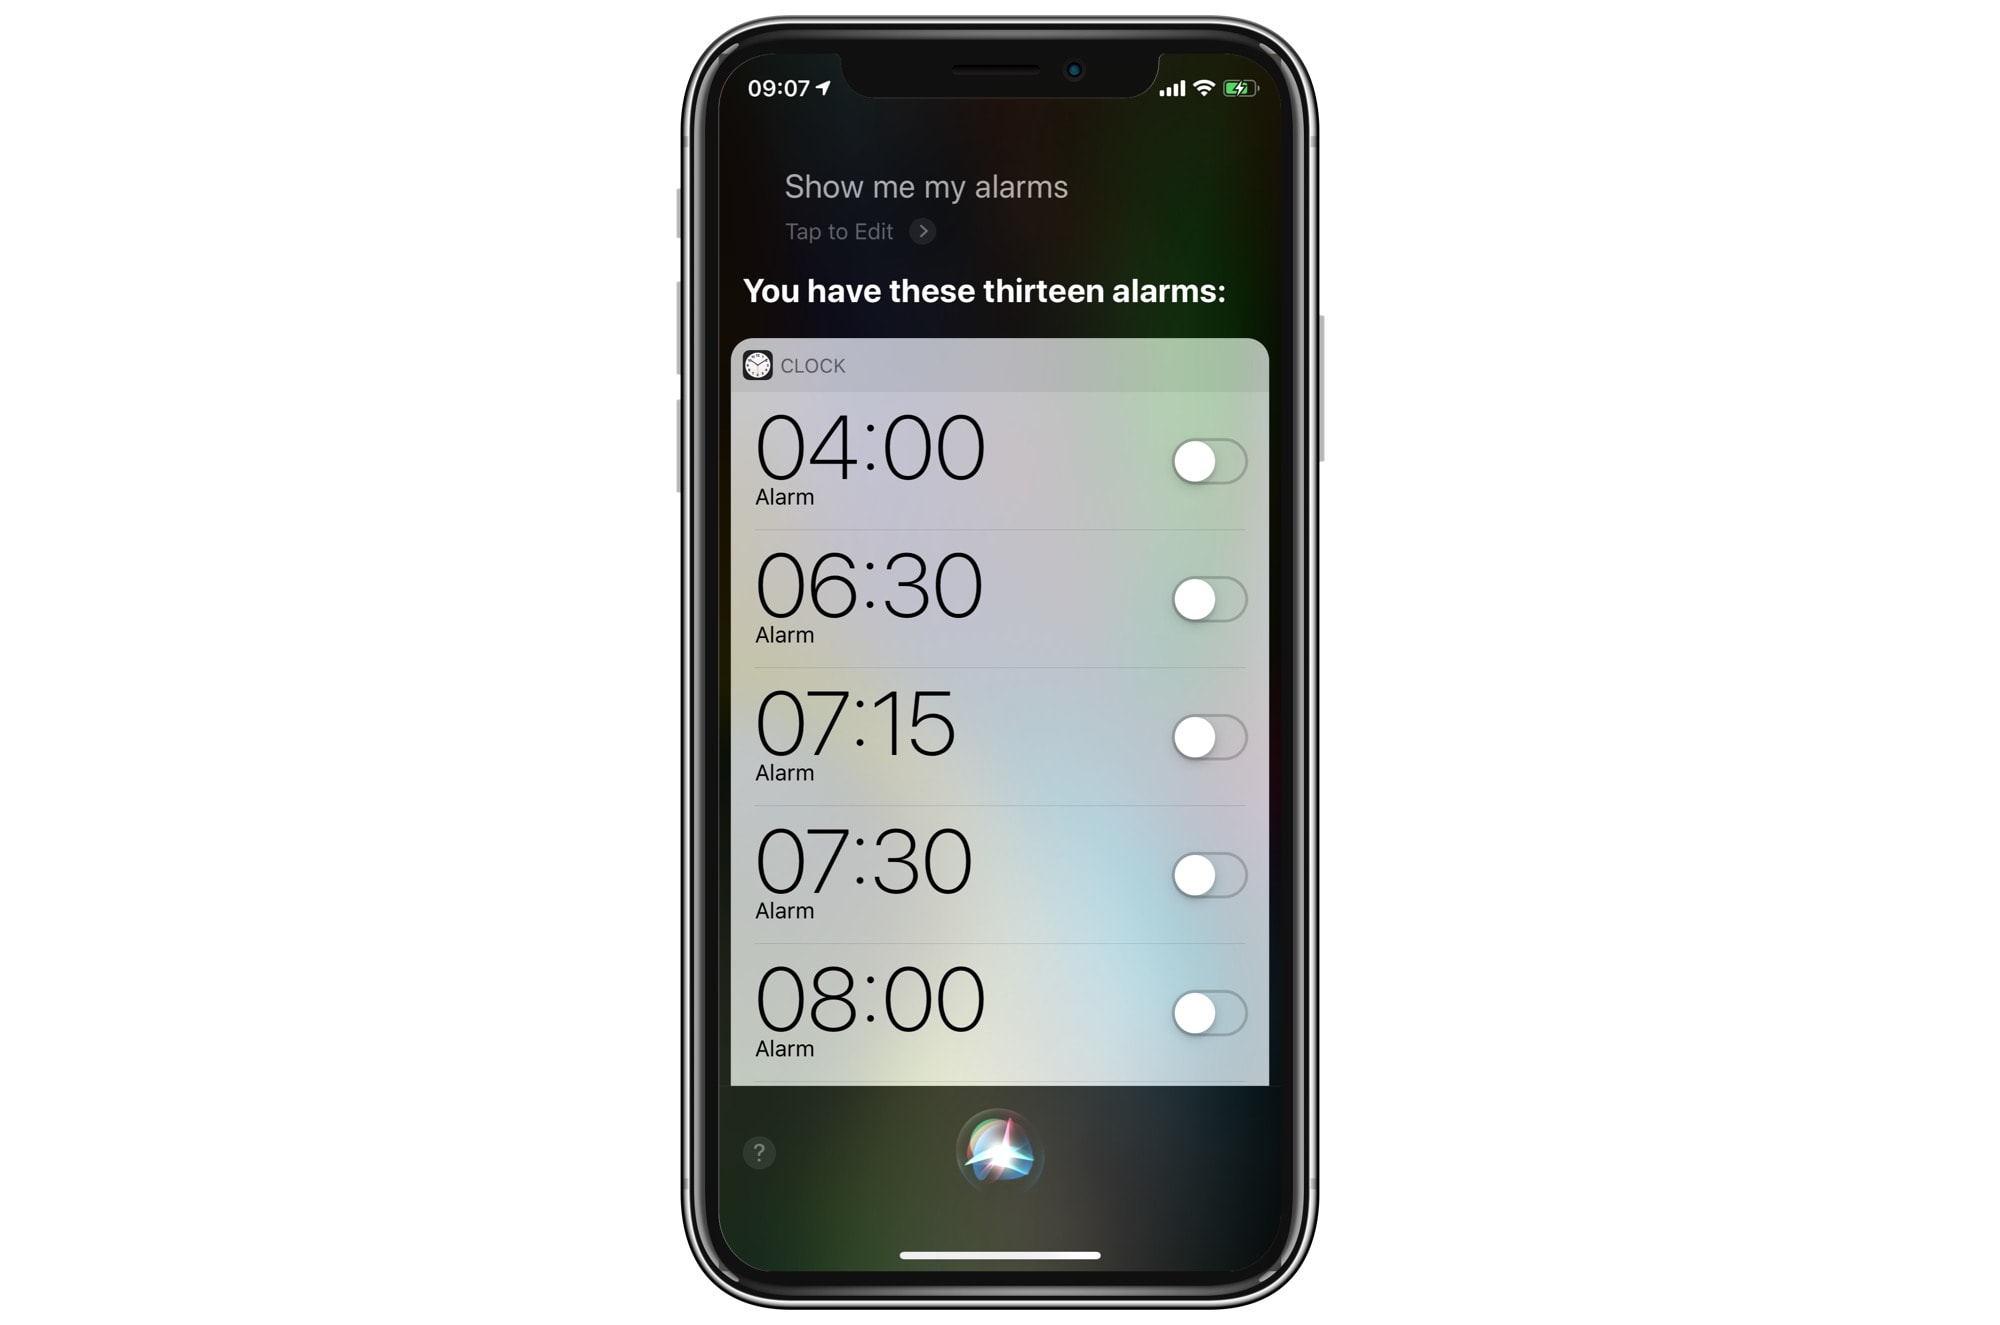 Siri can show you all your alarms.